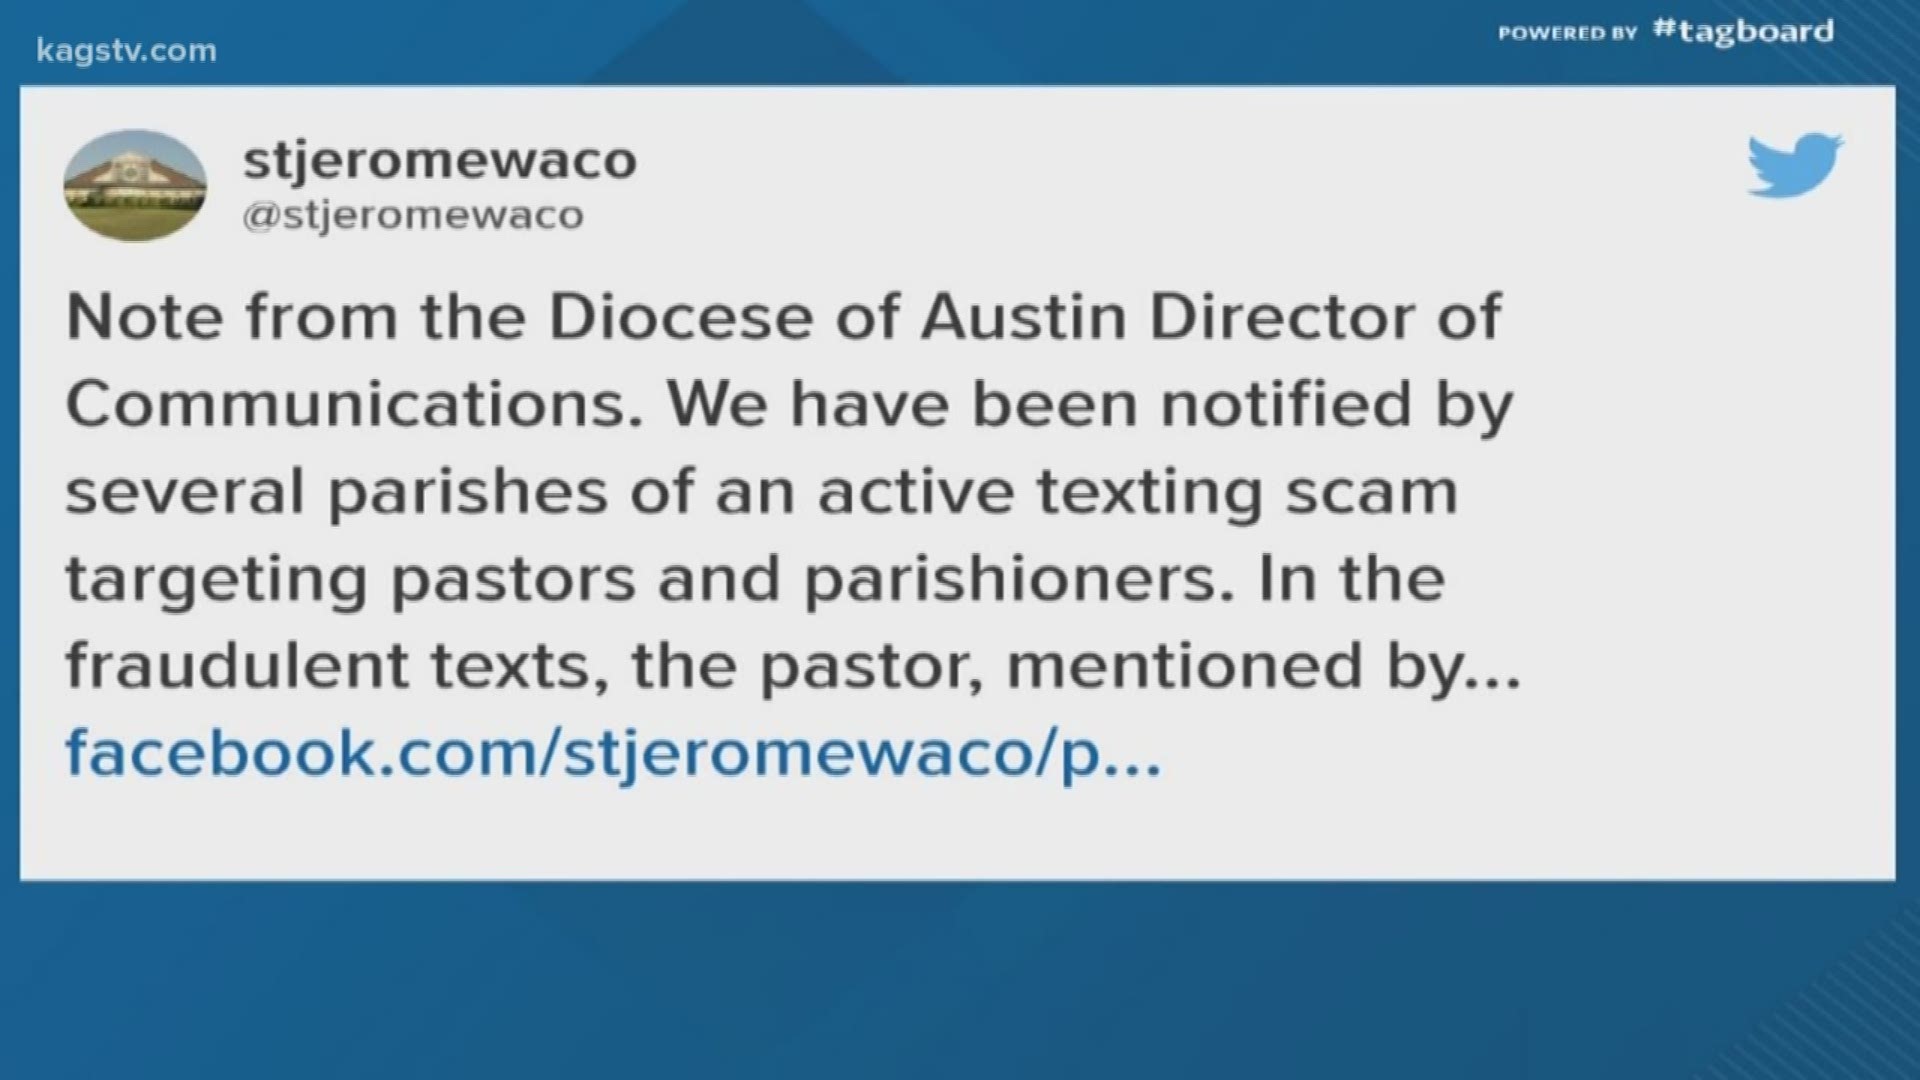 The Diocese says scammers are texting parishioners, posing as local pastors, by name, and asking for donations of gift cards.